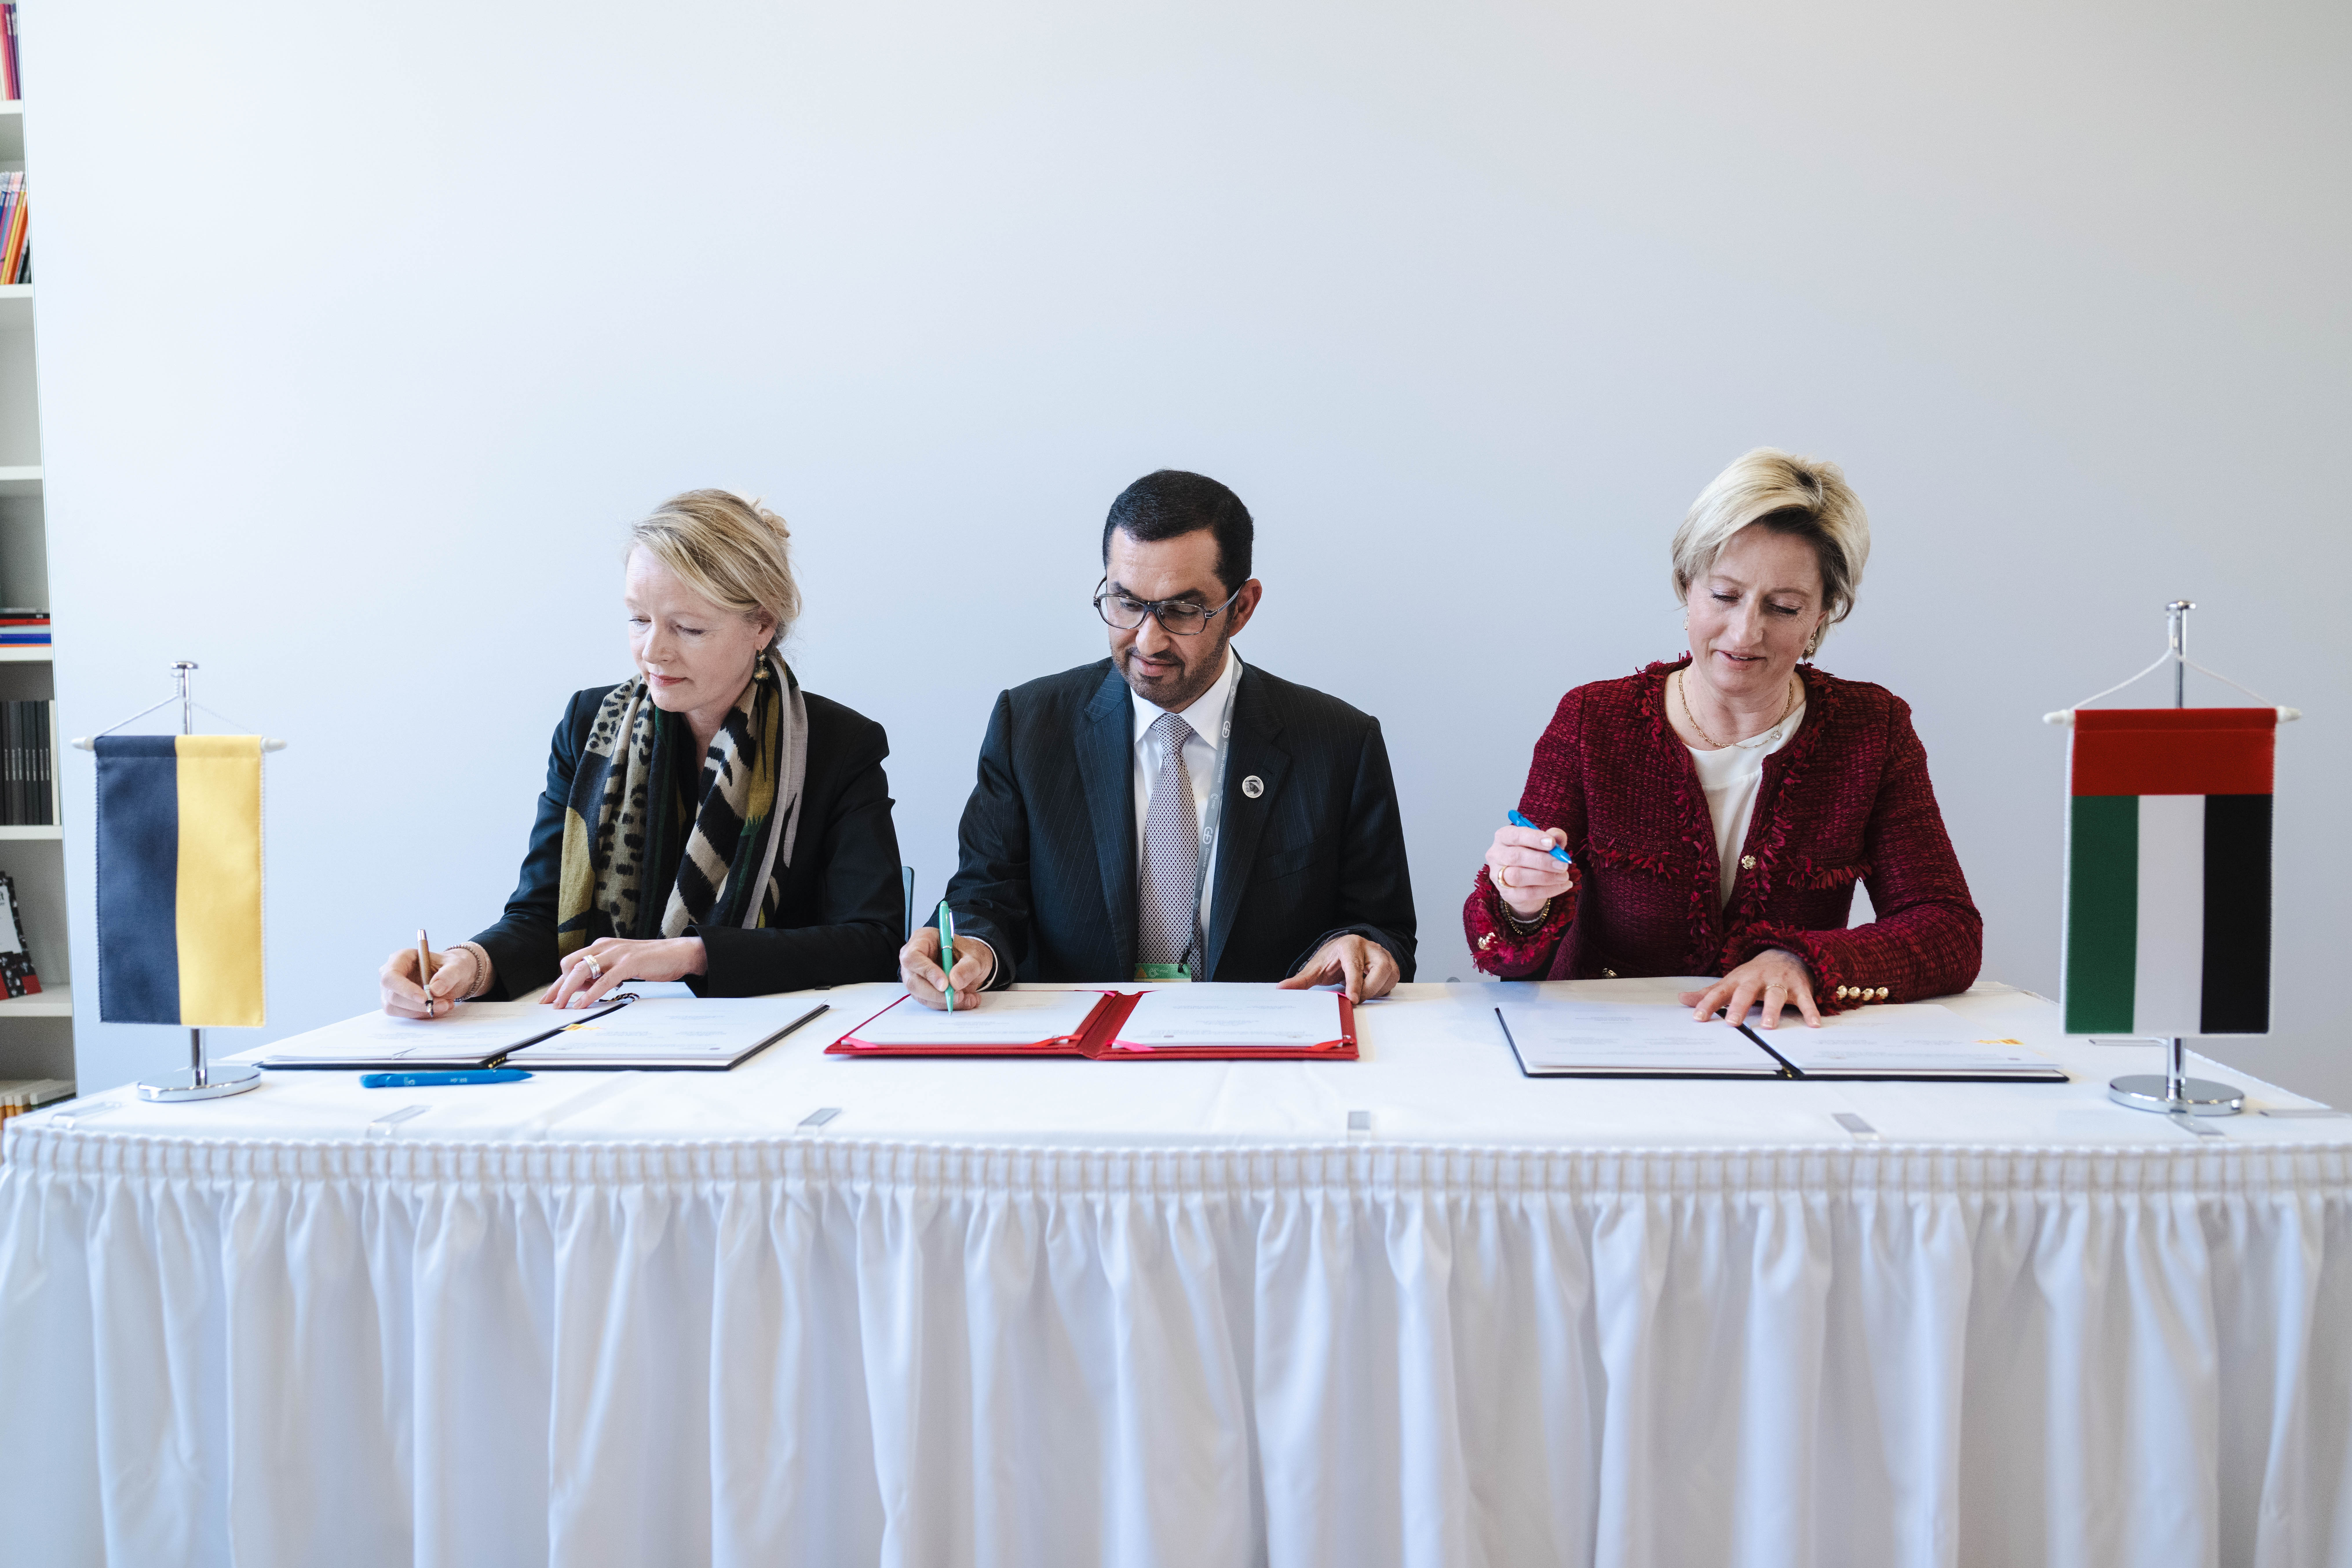 UAE, Baden-Württemberg sign comprehensive Joint Declaration of Intent on industrial cooperation, supply chain resiliency, and decarbonization opportunities